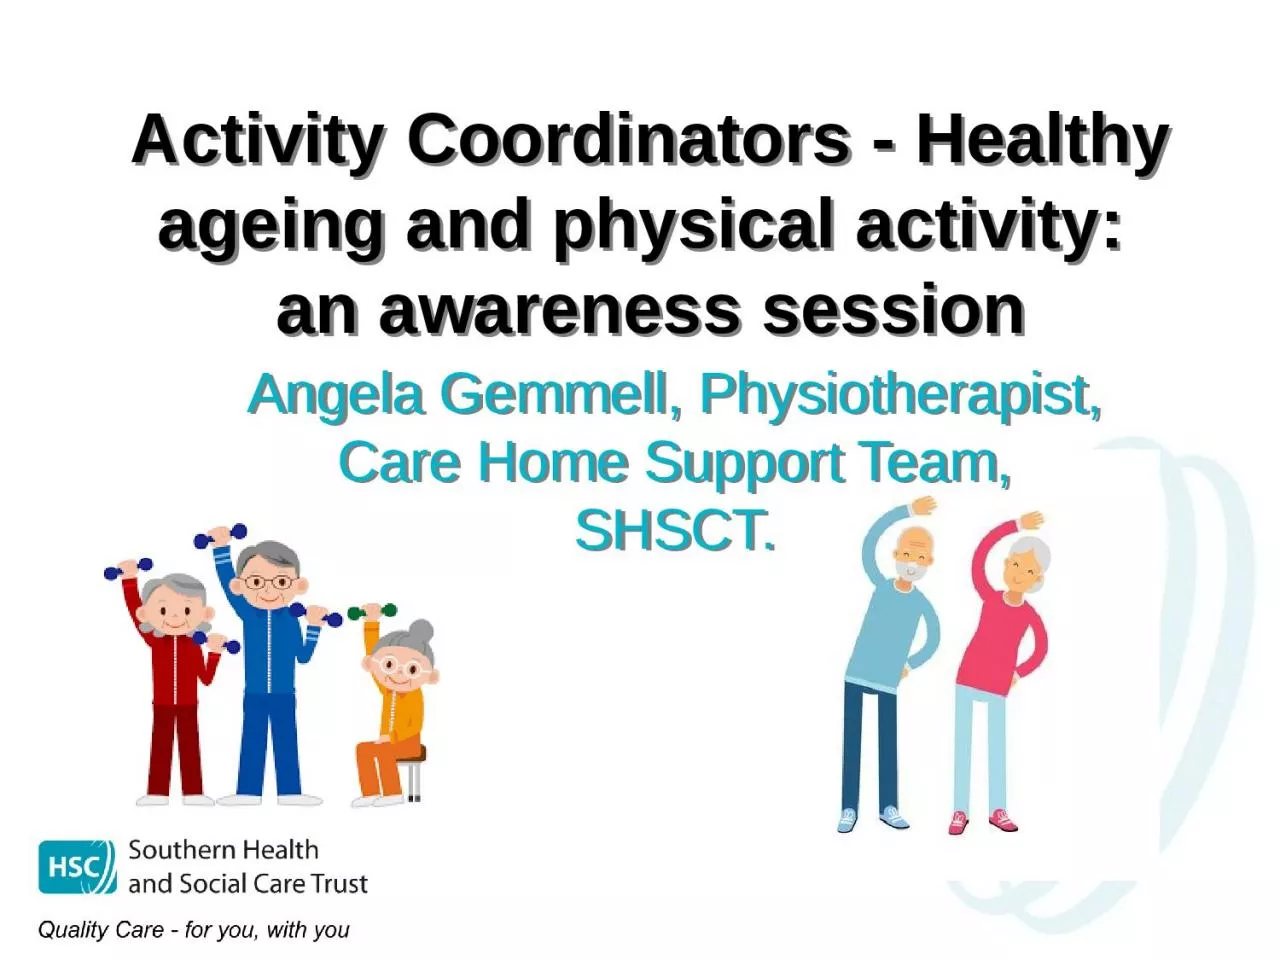 Angela Gemmell, Physiotherapist, Care Home Support Team, SHSCT.